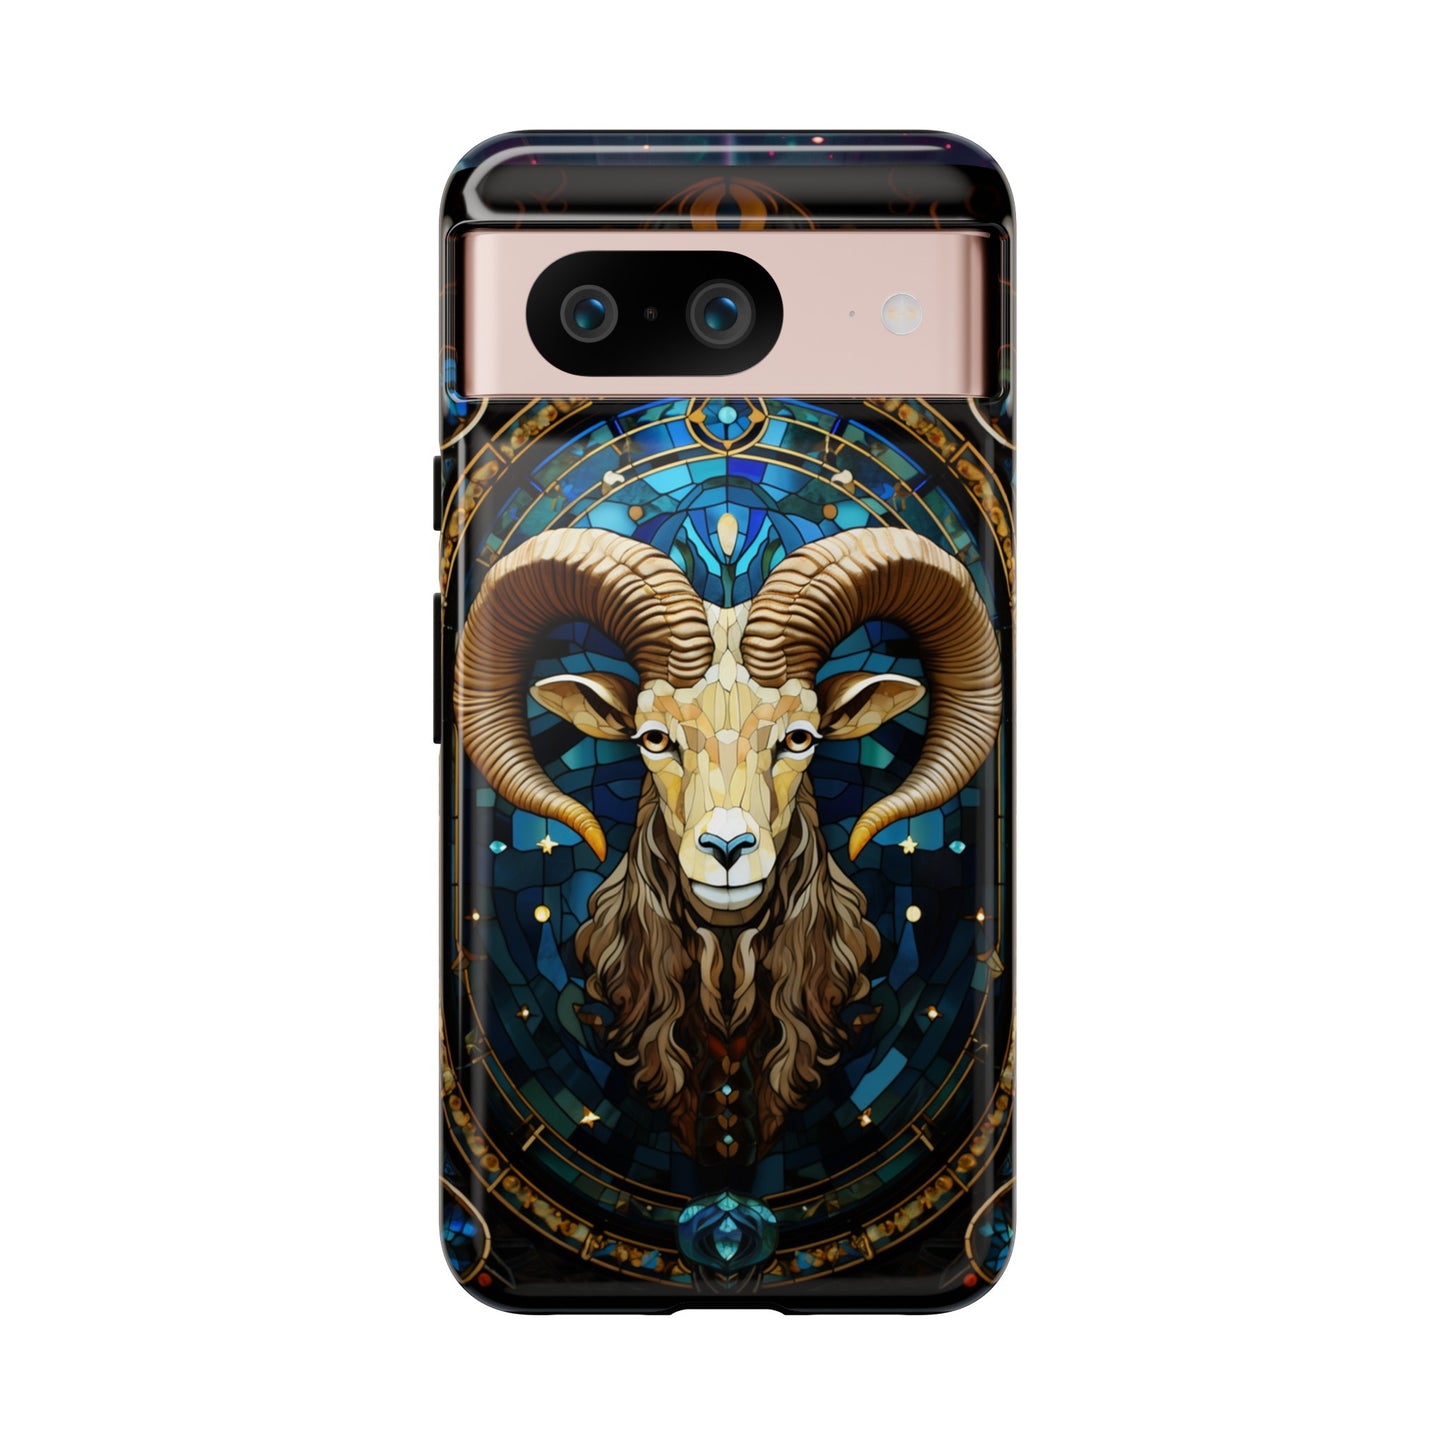 Aries phone case for Google Pixel